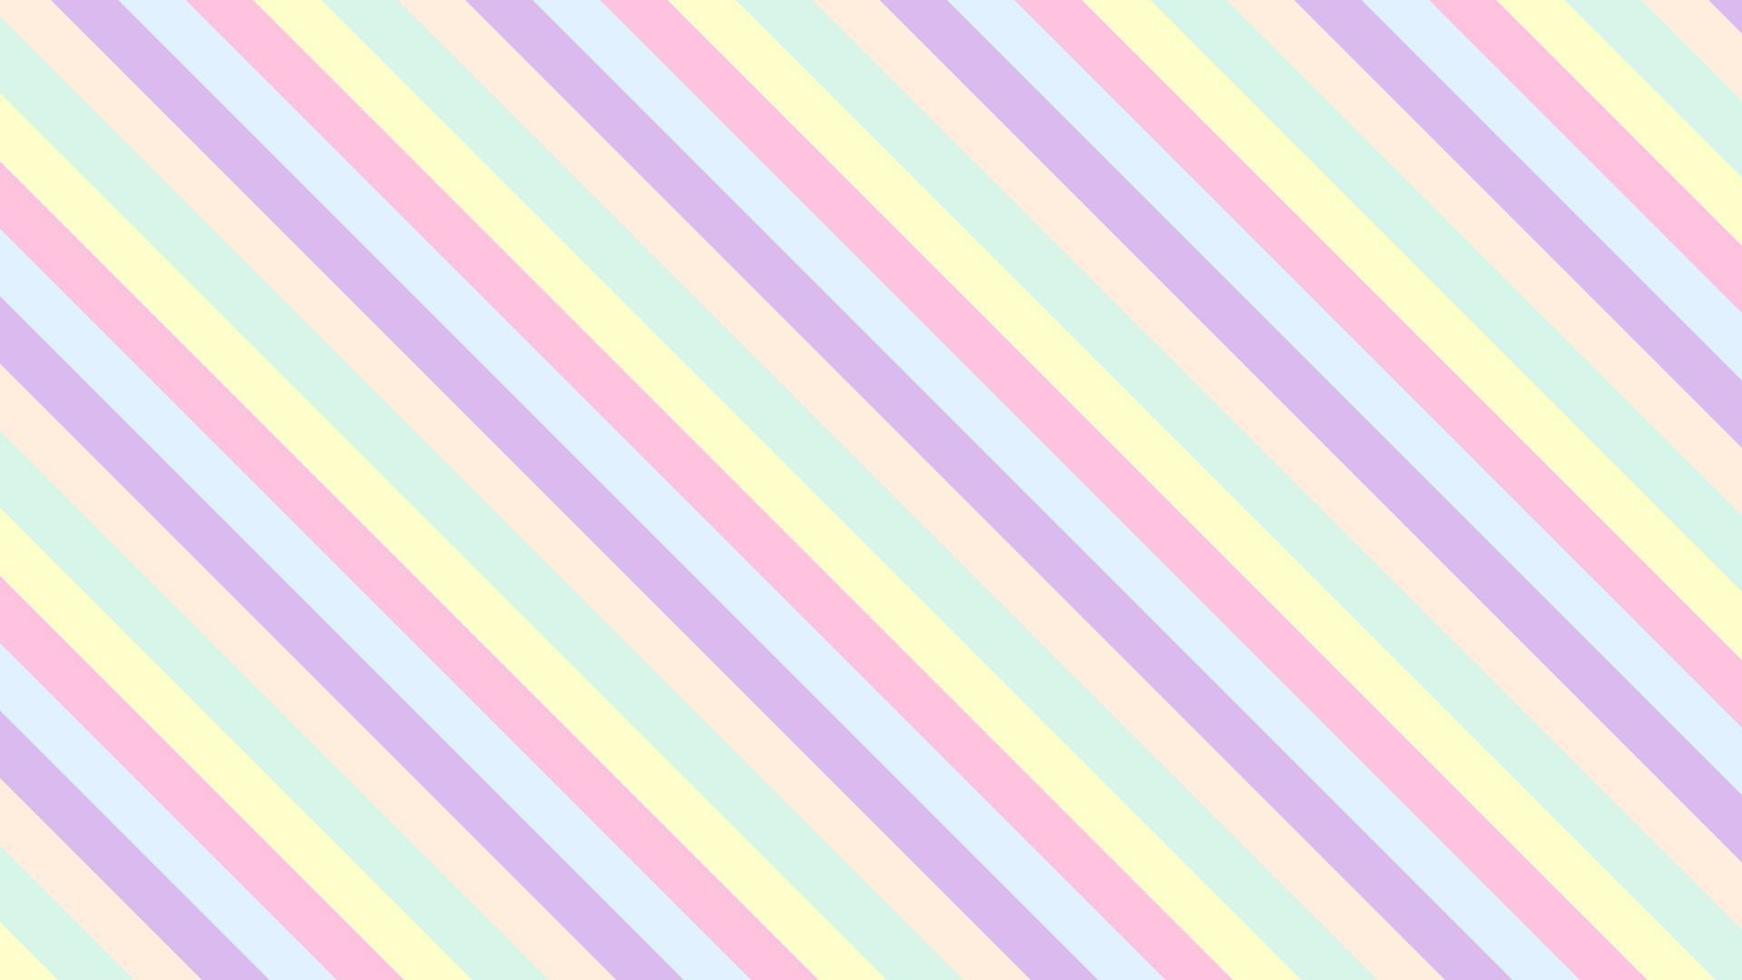 aesthetic abstract pastel striped line background illustration, perfect for wallpaper, backdrop, postcard, background